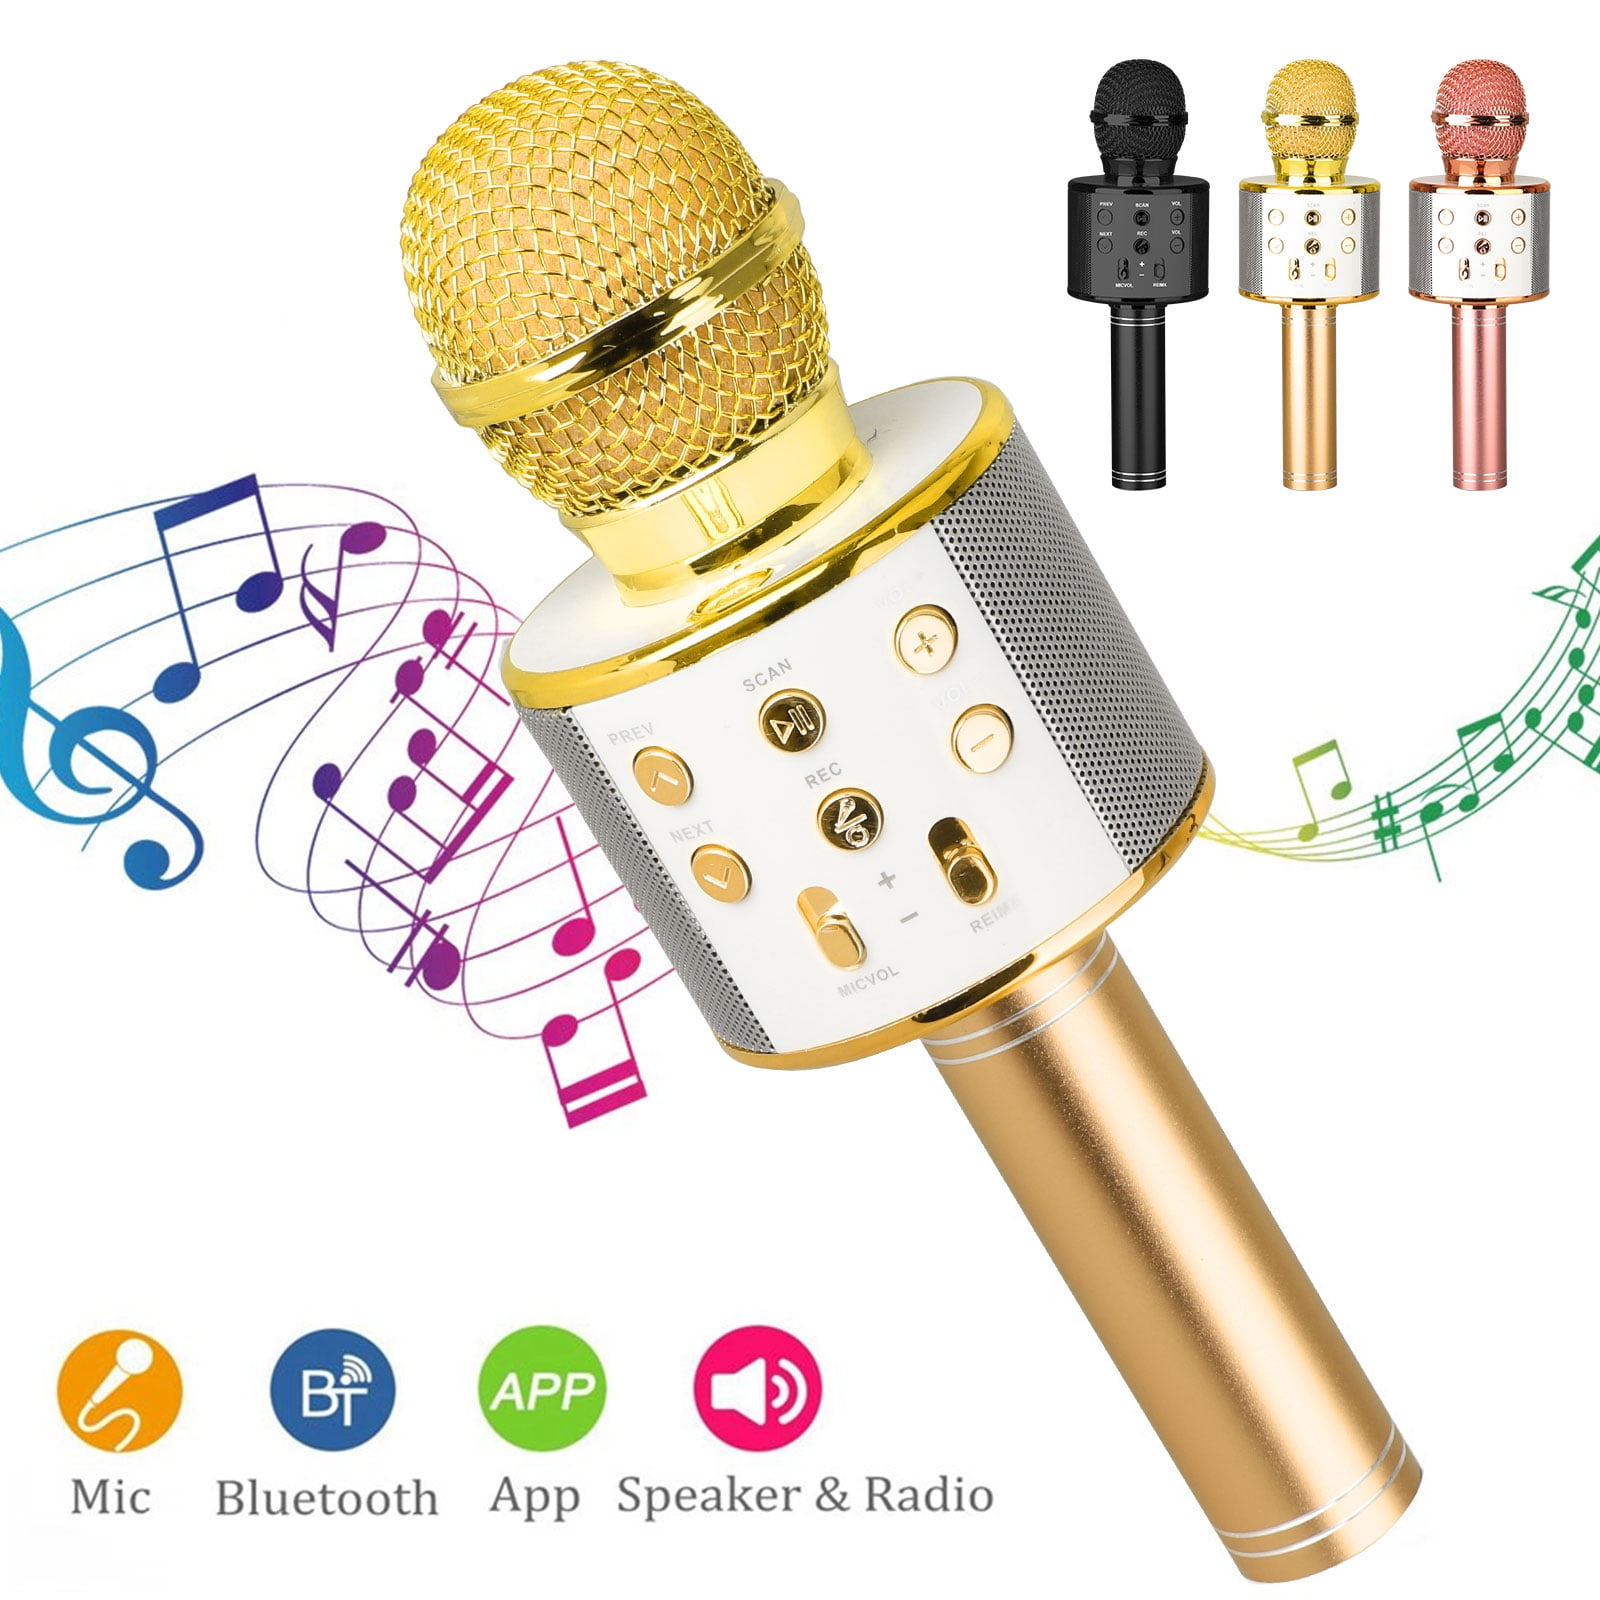 4 in2 Handheld Karaoke Machine Rose Gold Portable Mic Speaker for Christmas Birthday Party Singing Compatible with iPhone/Android/PC or All Smartphone Malease Wireless Bluetooth Karaoke Microphone